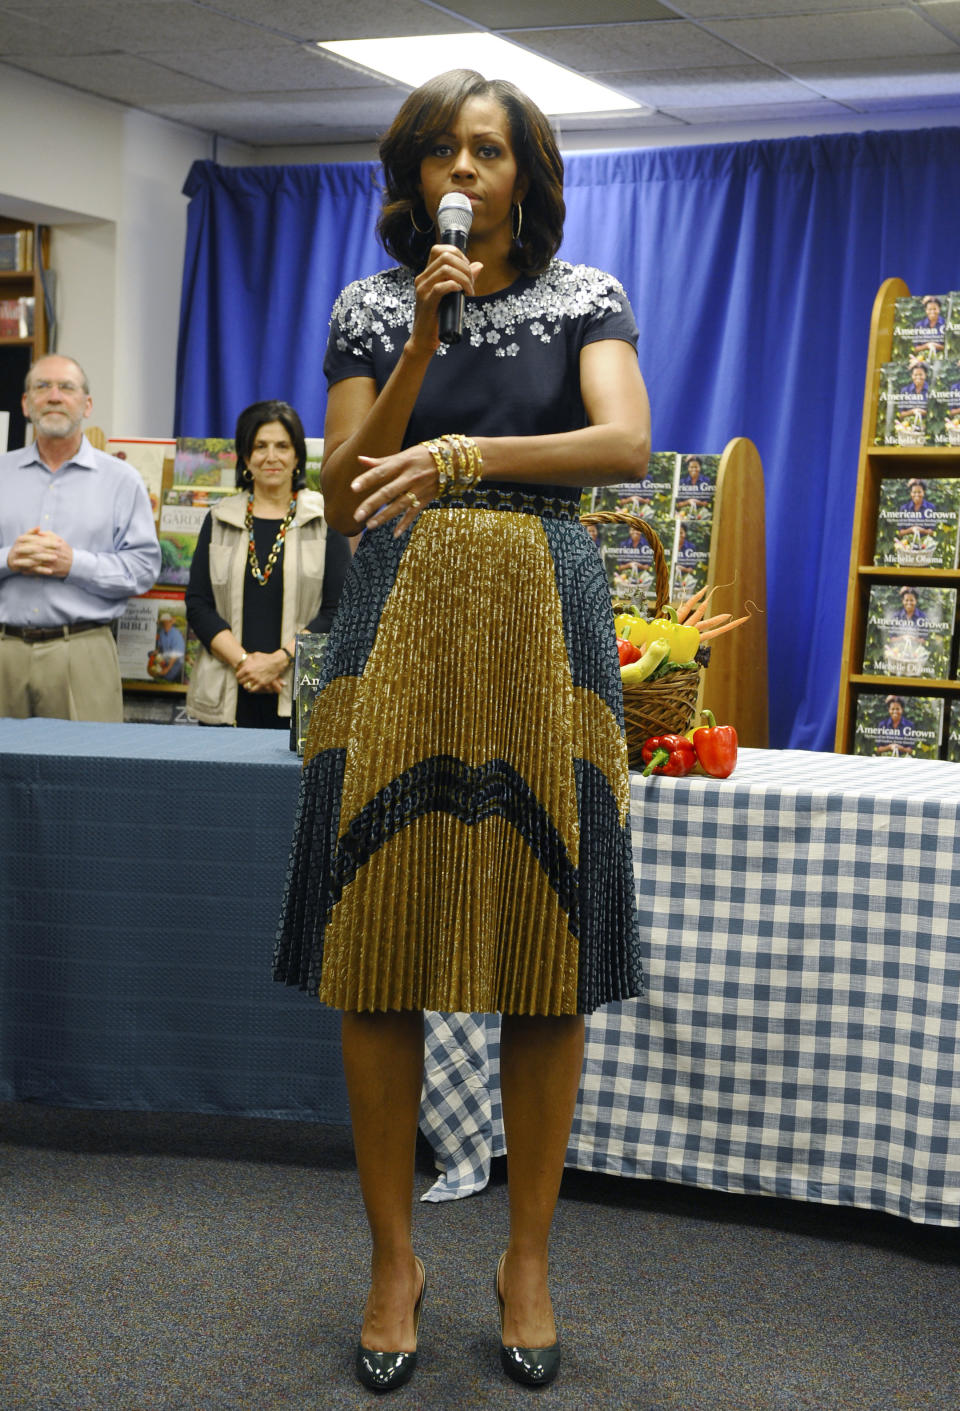 US First Lady Michelle Obama speaks during a book signing event of her book 'American Grown: The Story of the White House Kitchen Garden and Gardens Across America,' at Politics & Prose in Washington, DC, on May 7, 2013. Photo credit:  JEWEL SAMAD/AFP/Getty Images